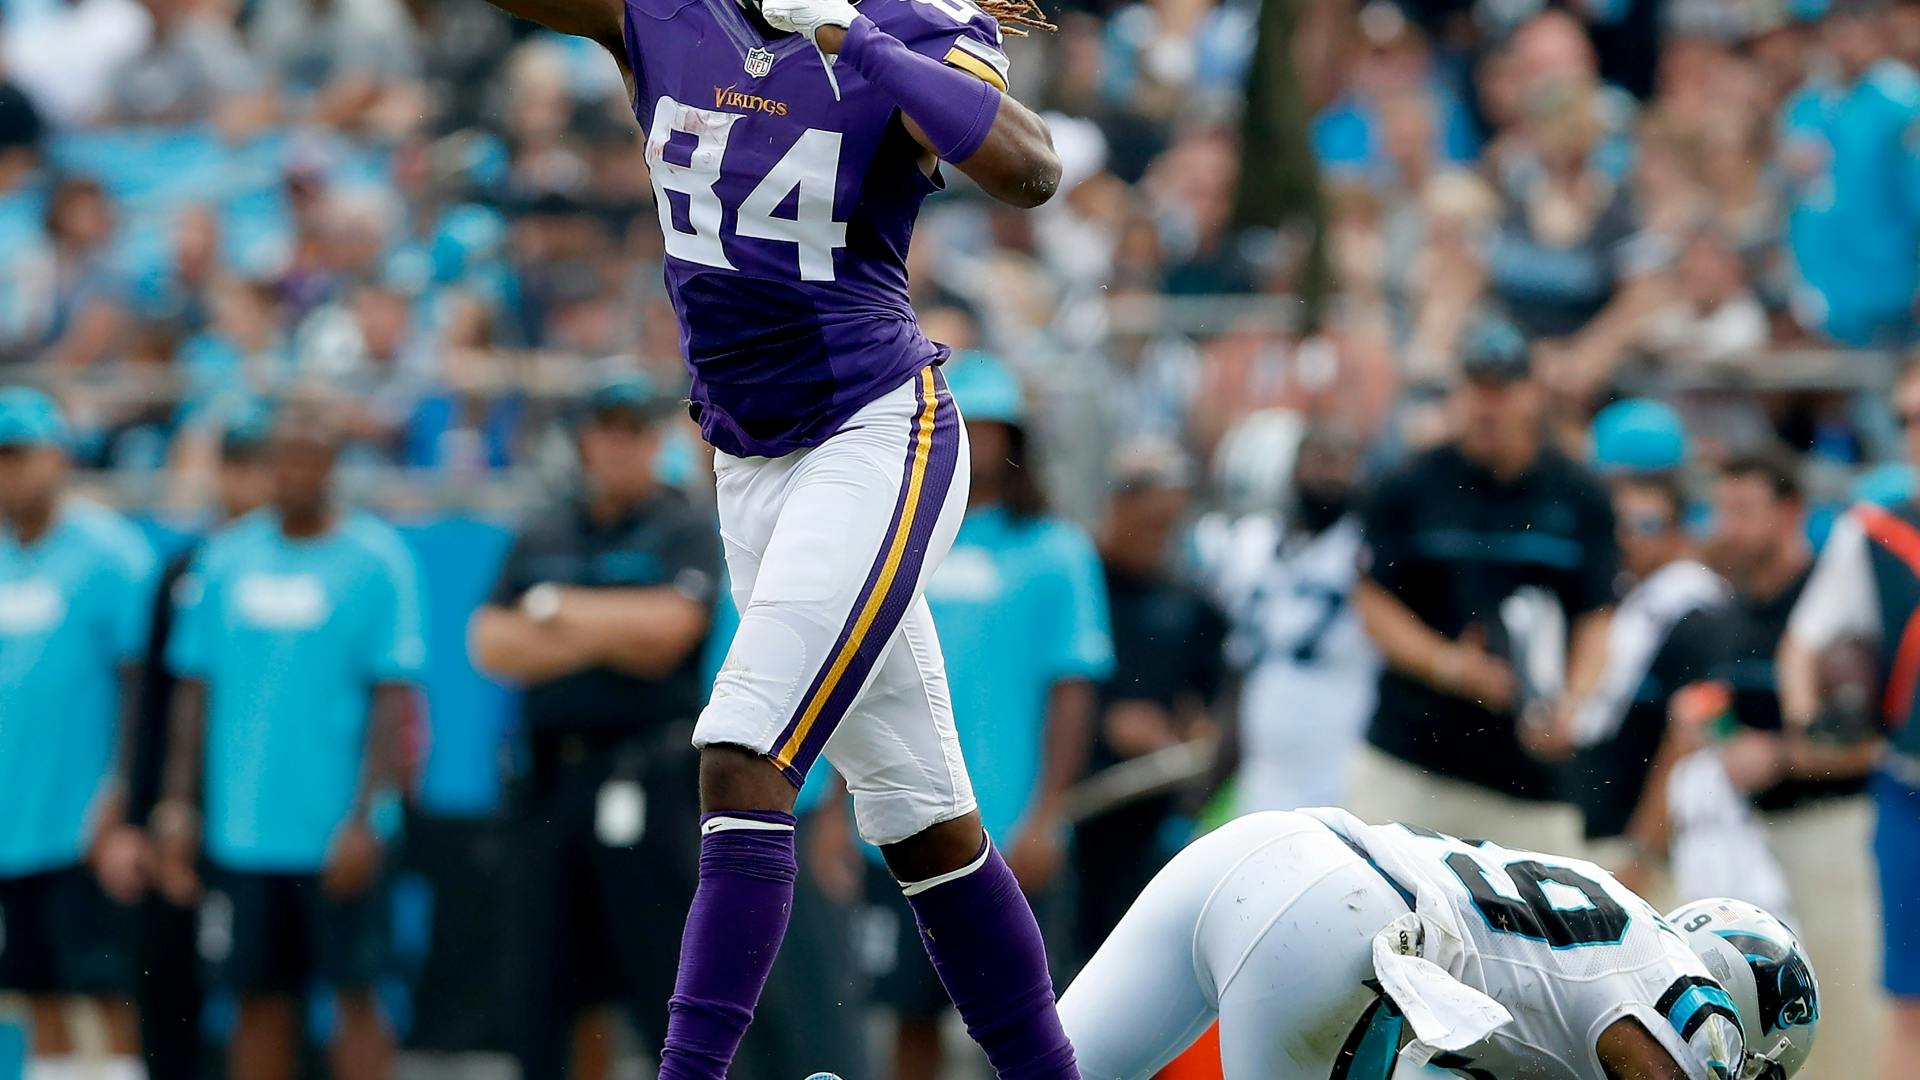 Vikings players are taking on different roles in order to help the team win